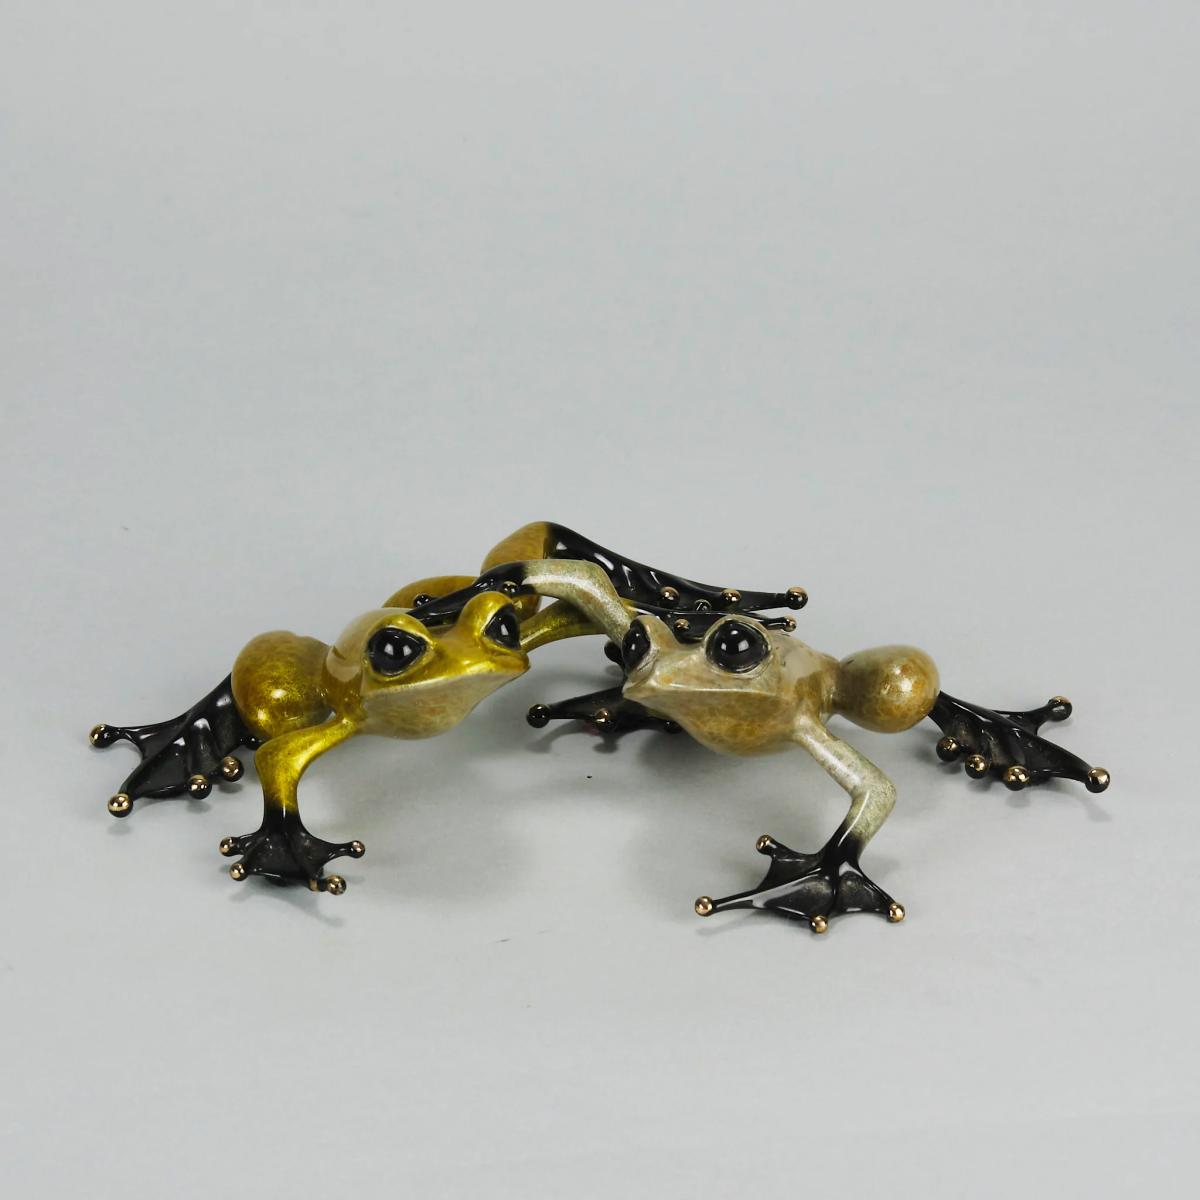 Limited Edition Bronze Frogs entitled "Love" by Tim Cotterill - Circa 2010